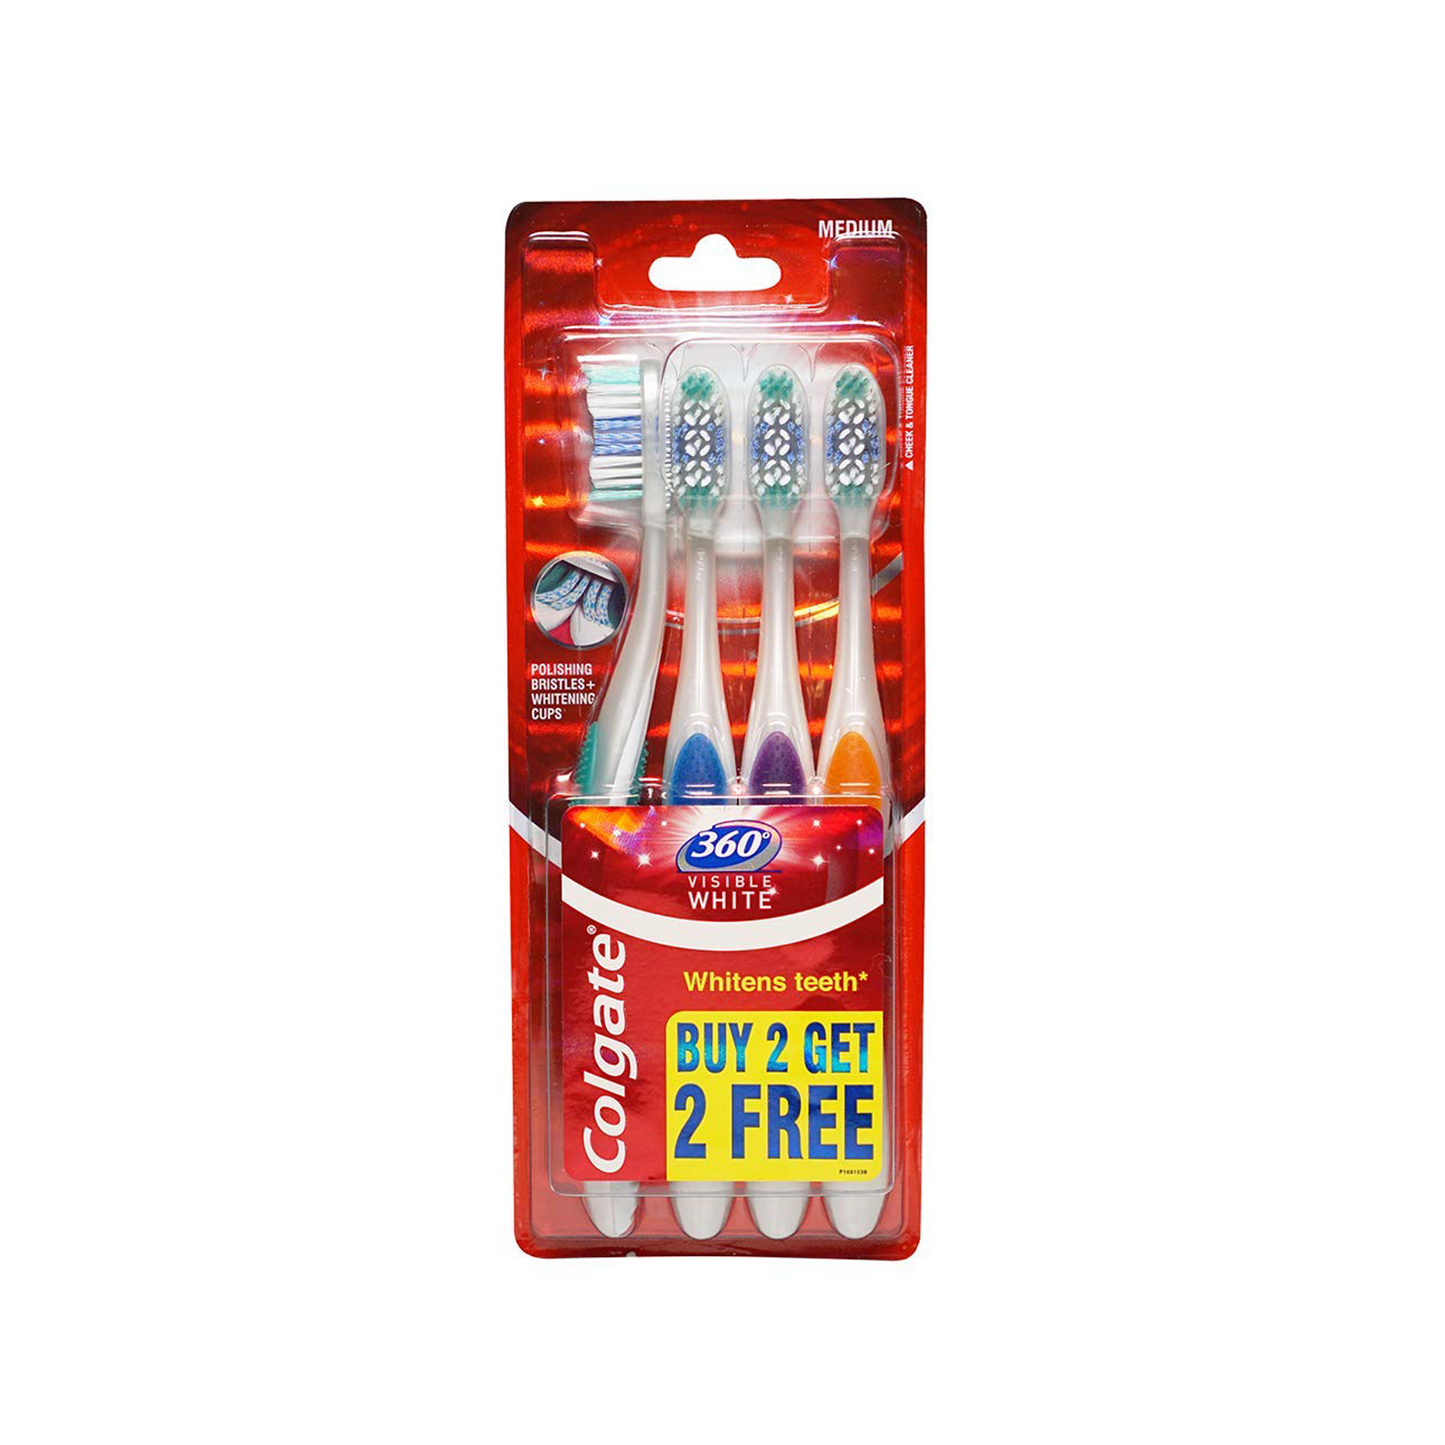 Colgate 360 Visible White Tooth Brush.